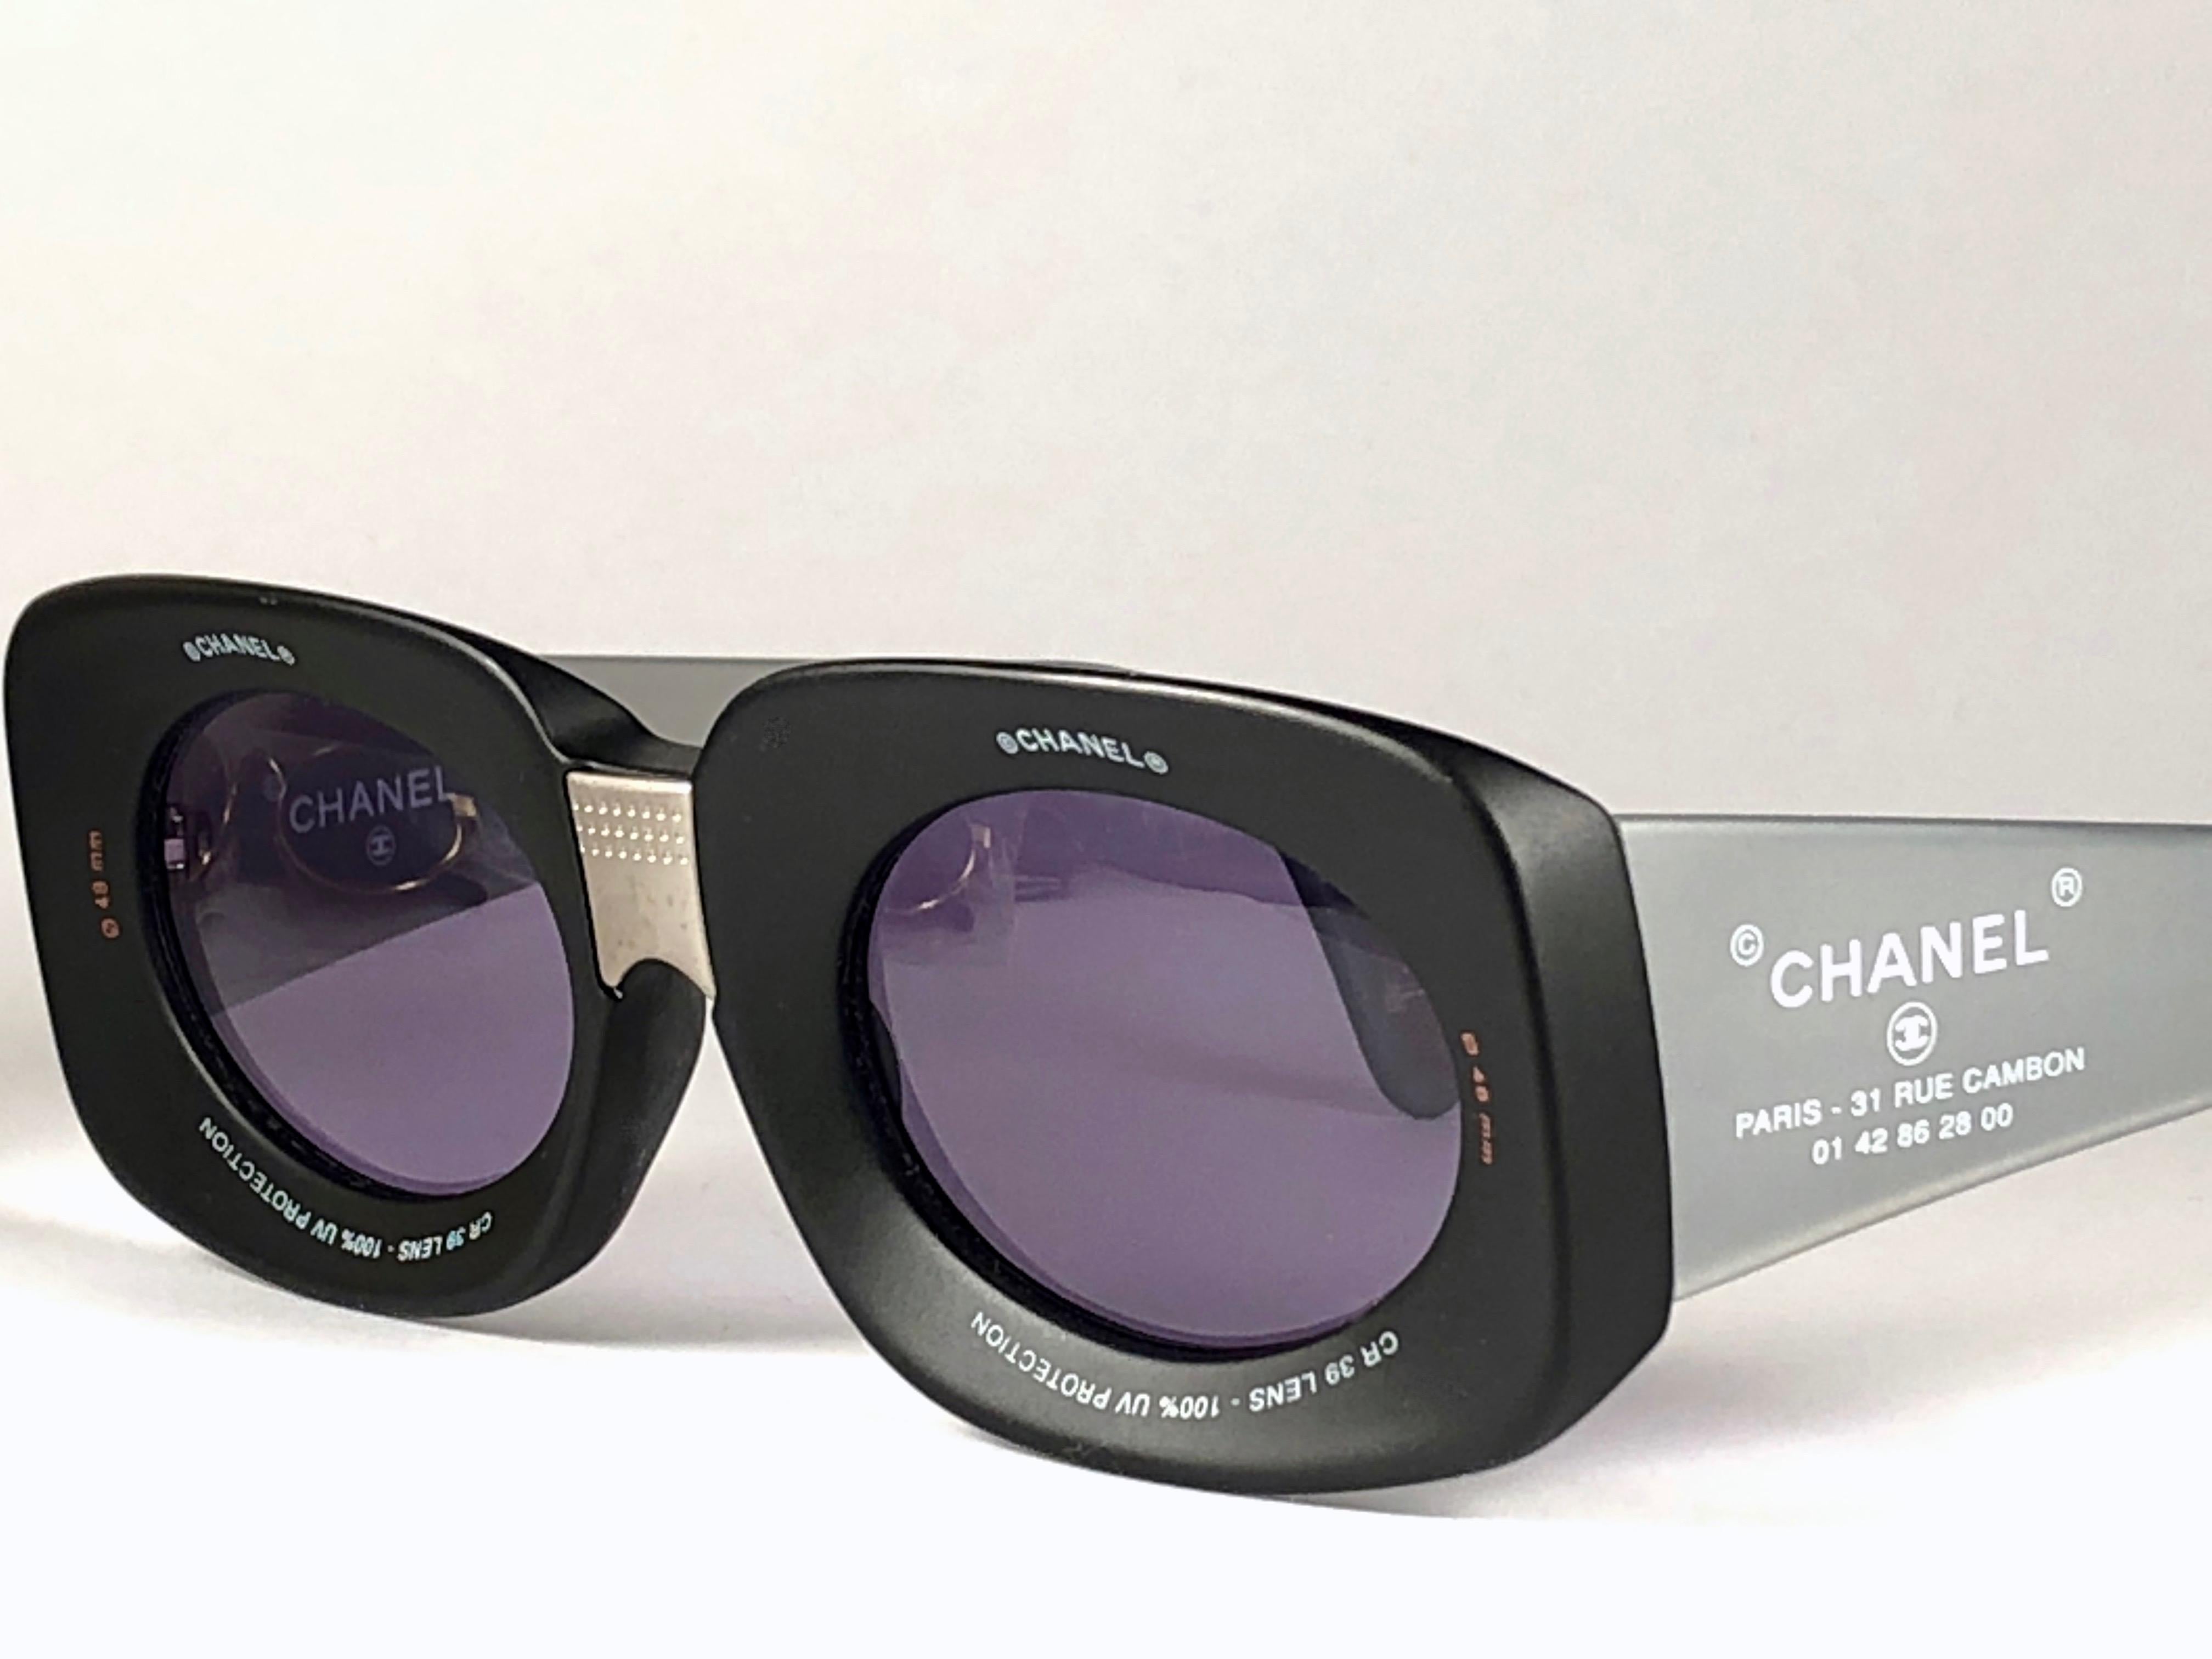 Chanel Vintage Camera Lens Black & Grey Sunglasses Made in Italy Collector Item 6